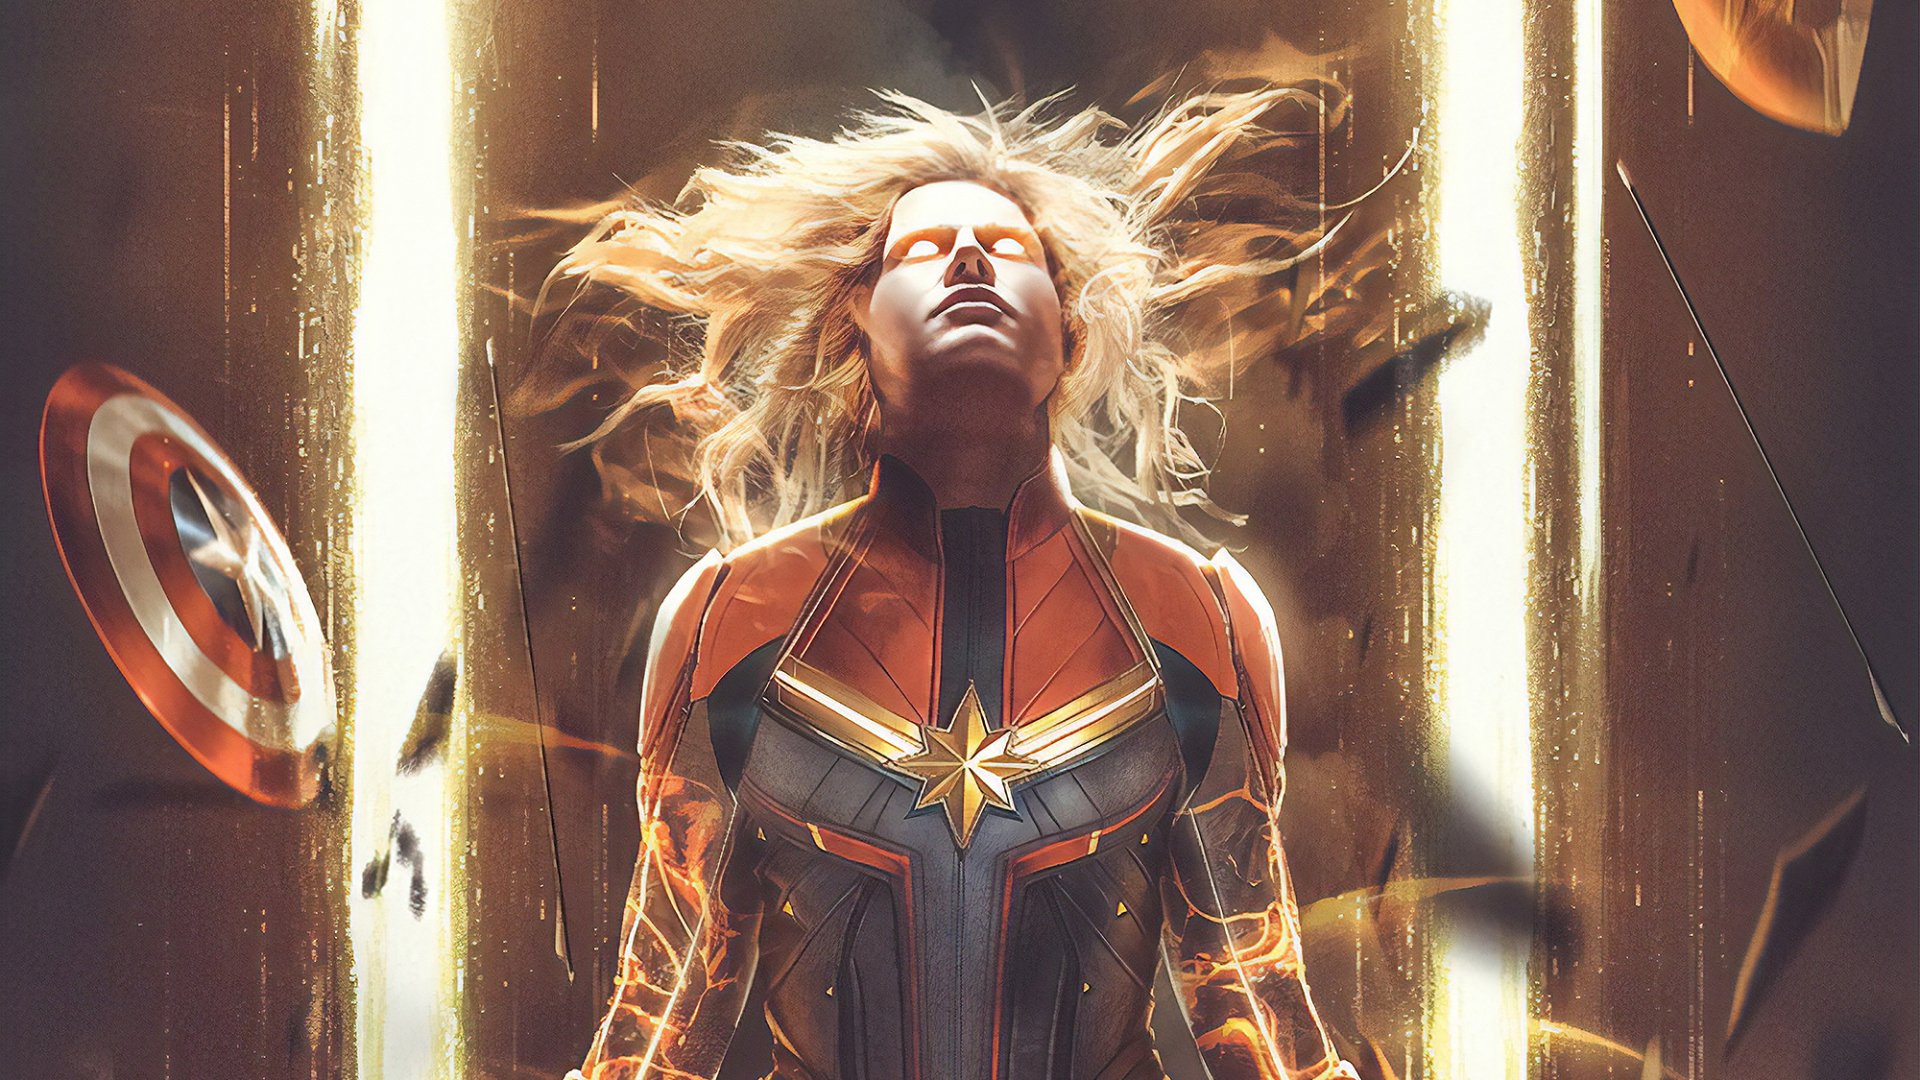 Captain Marvel download the new version for apple